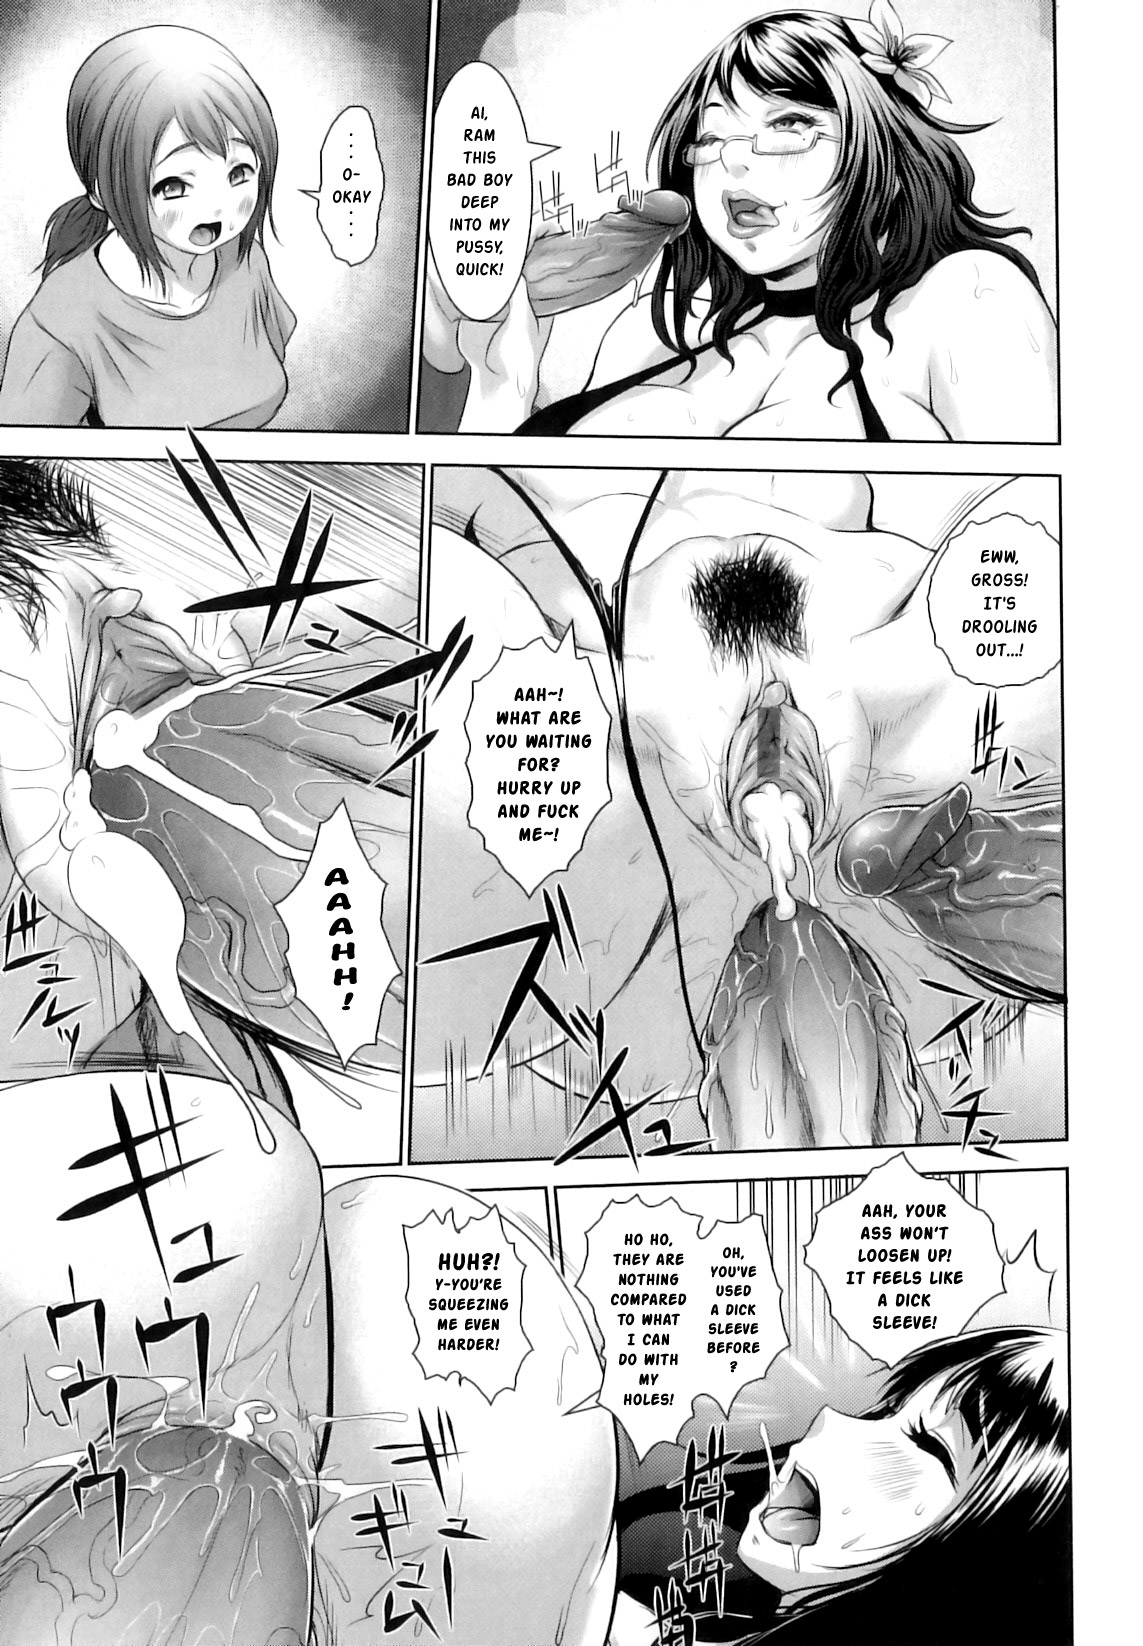 [Chinbotsu] Summer! First Sexual Experience [English] 